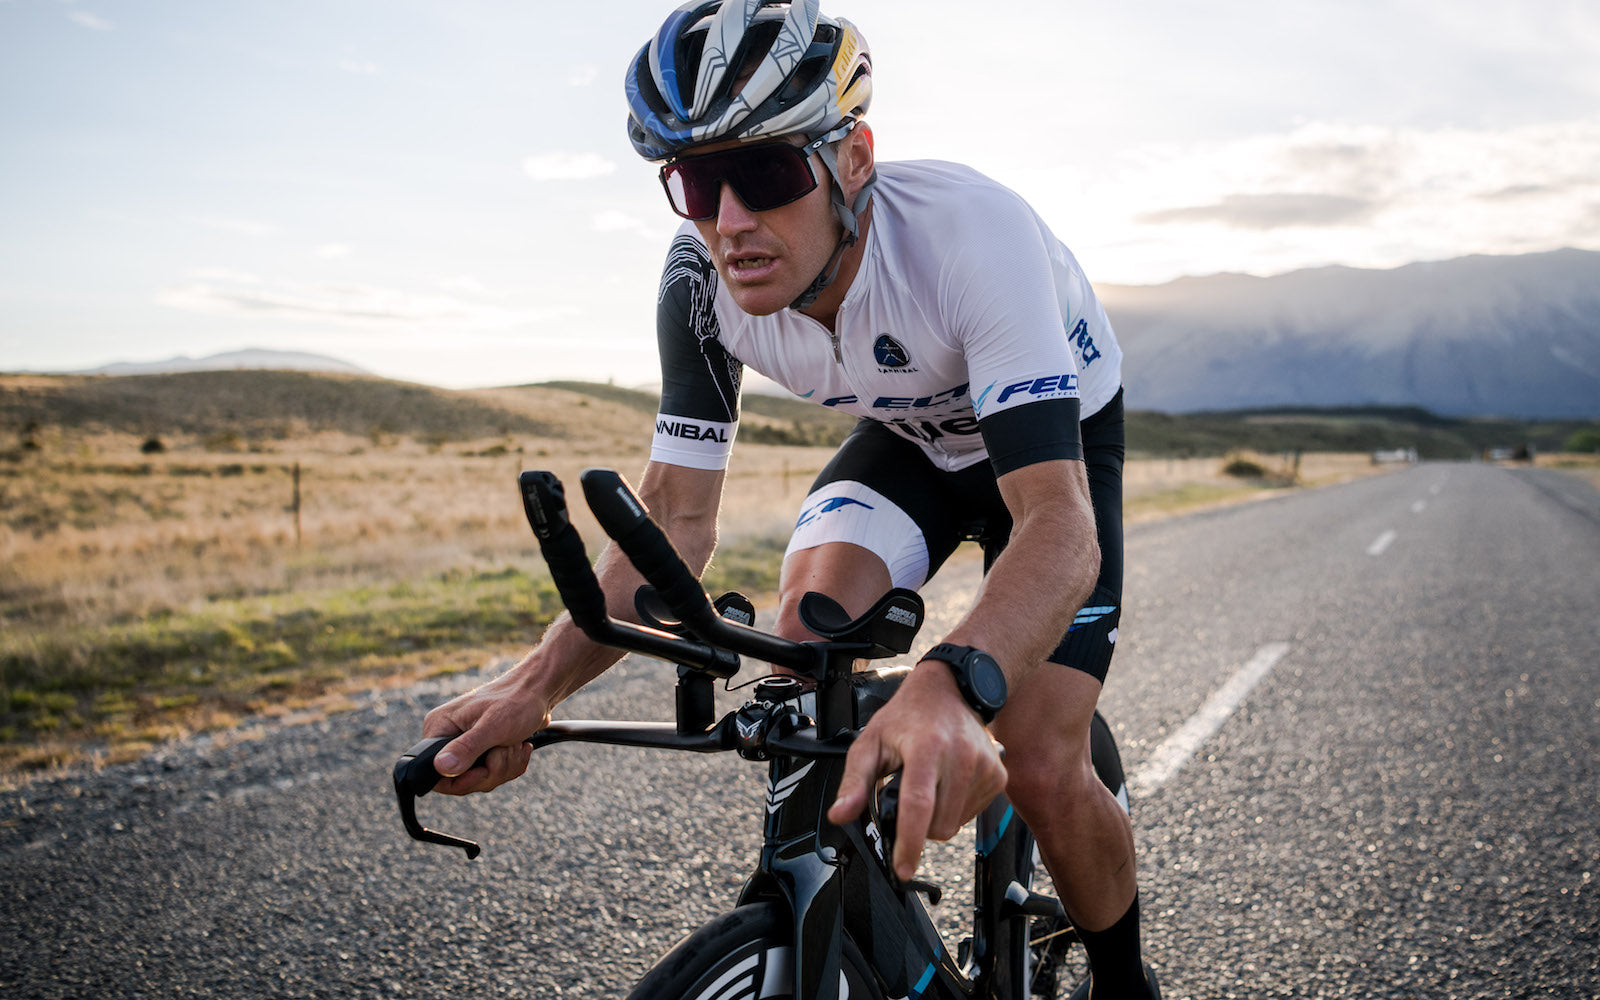 Pro Triathlete Braden Currie Joins Felt Bicycles For 2021 & Beyond